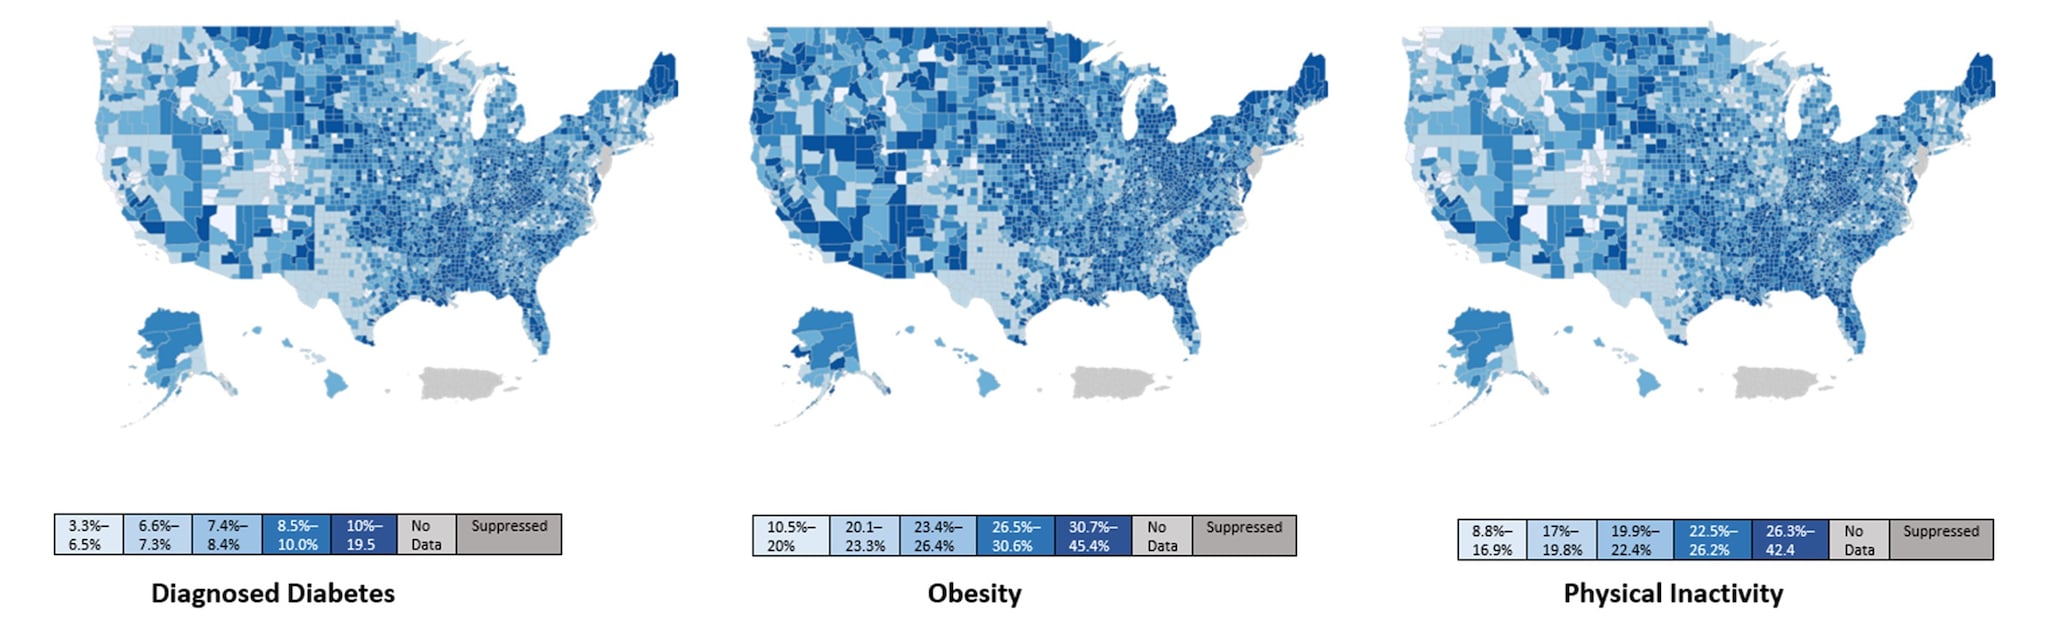 For detailed data for each map, go to https://gis.cdc.gov/grasp/diabetes/DiabetesAtlas.html#. Click on the “County” tab in the panel on the left, then select “All Counties.” Click on the “Indicators” tab and select “Burden/Magnitude” to see data for Diagnosed Diabetes or select “Risk Factors for Diabetes” to see data for Obesity or Physical Inactivity..